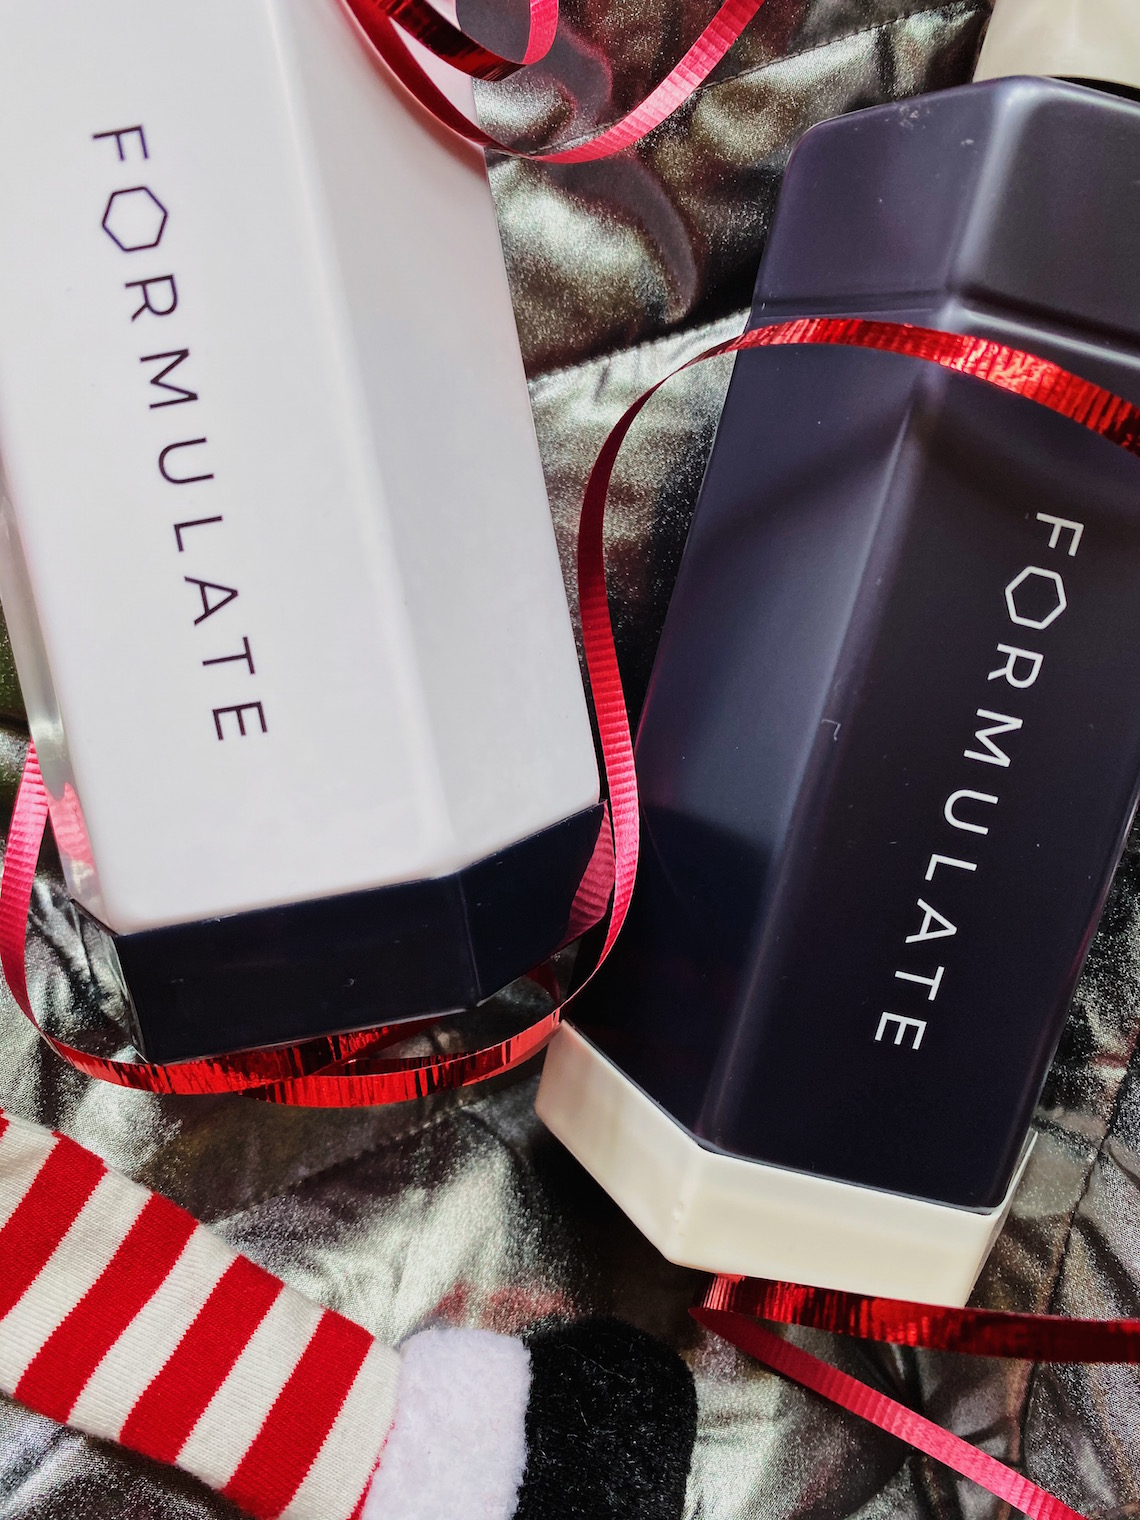 formulate-personalized shampoo and conditioner